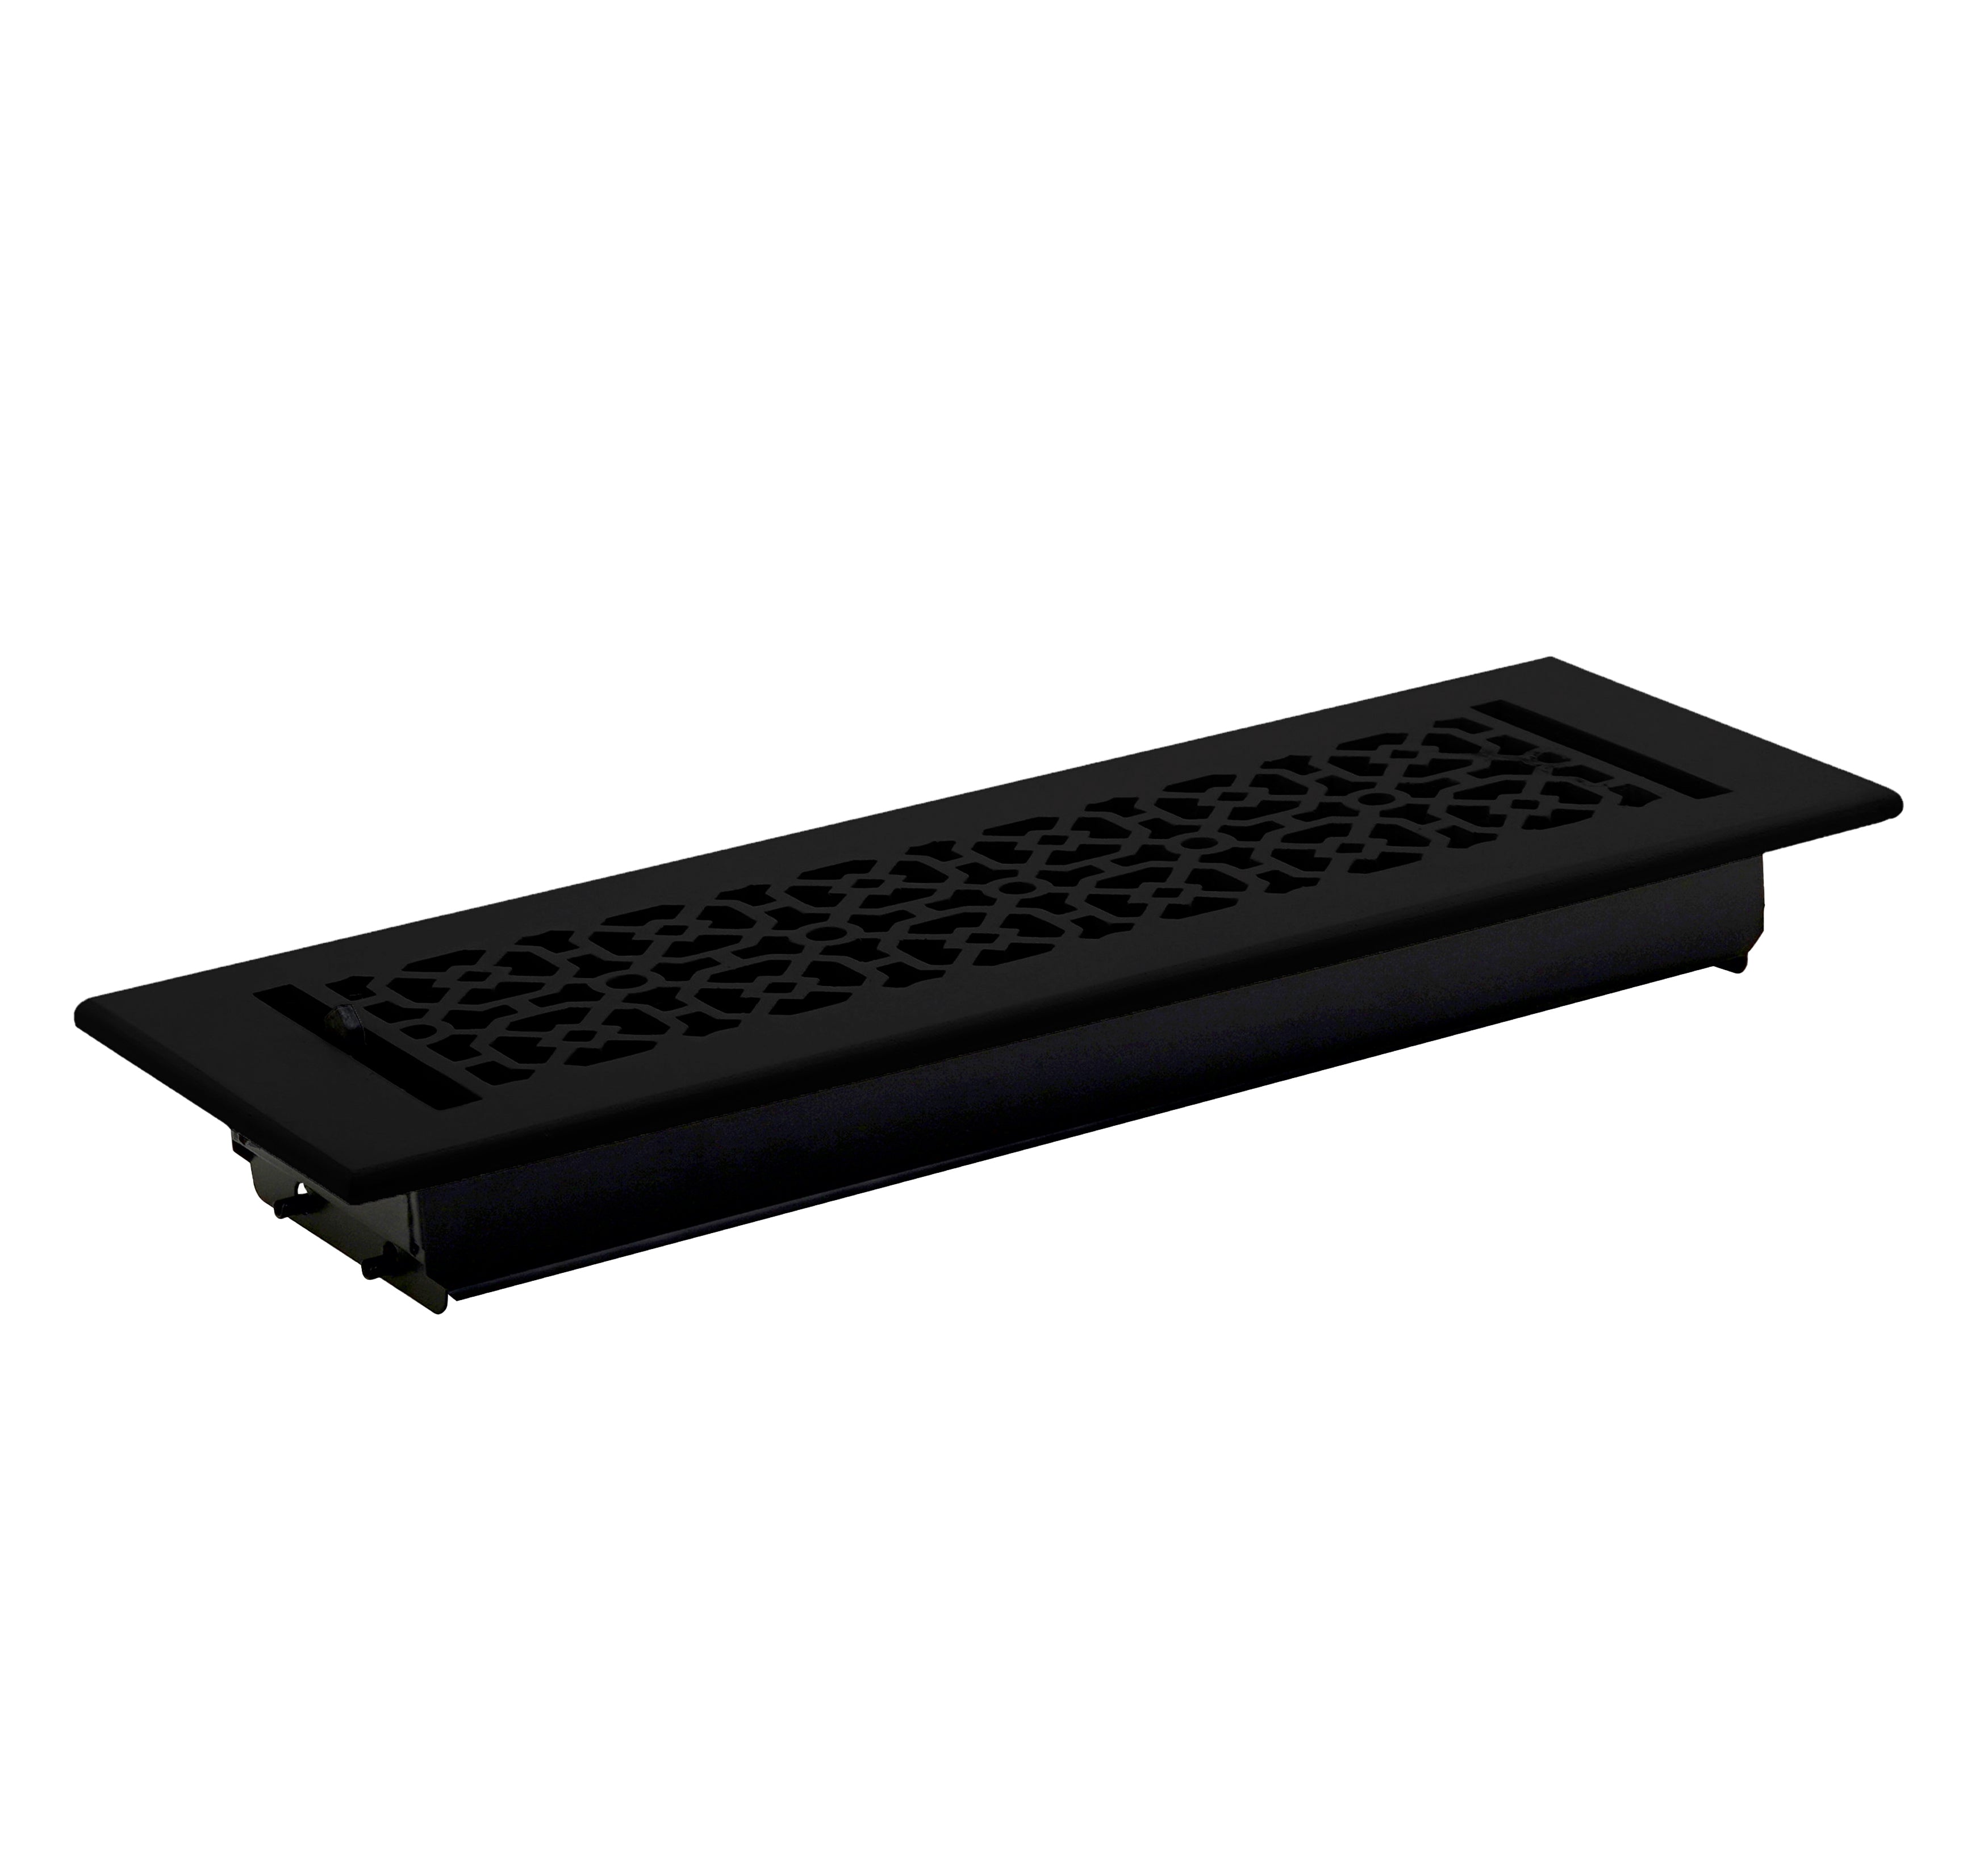 Achtek Air Supply Vent 4"x 14" Duct Opening (Overall 5-1/2"x 15-3/4") Solid Cast Aluminium Register Cover | Powder Coated